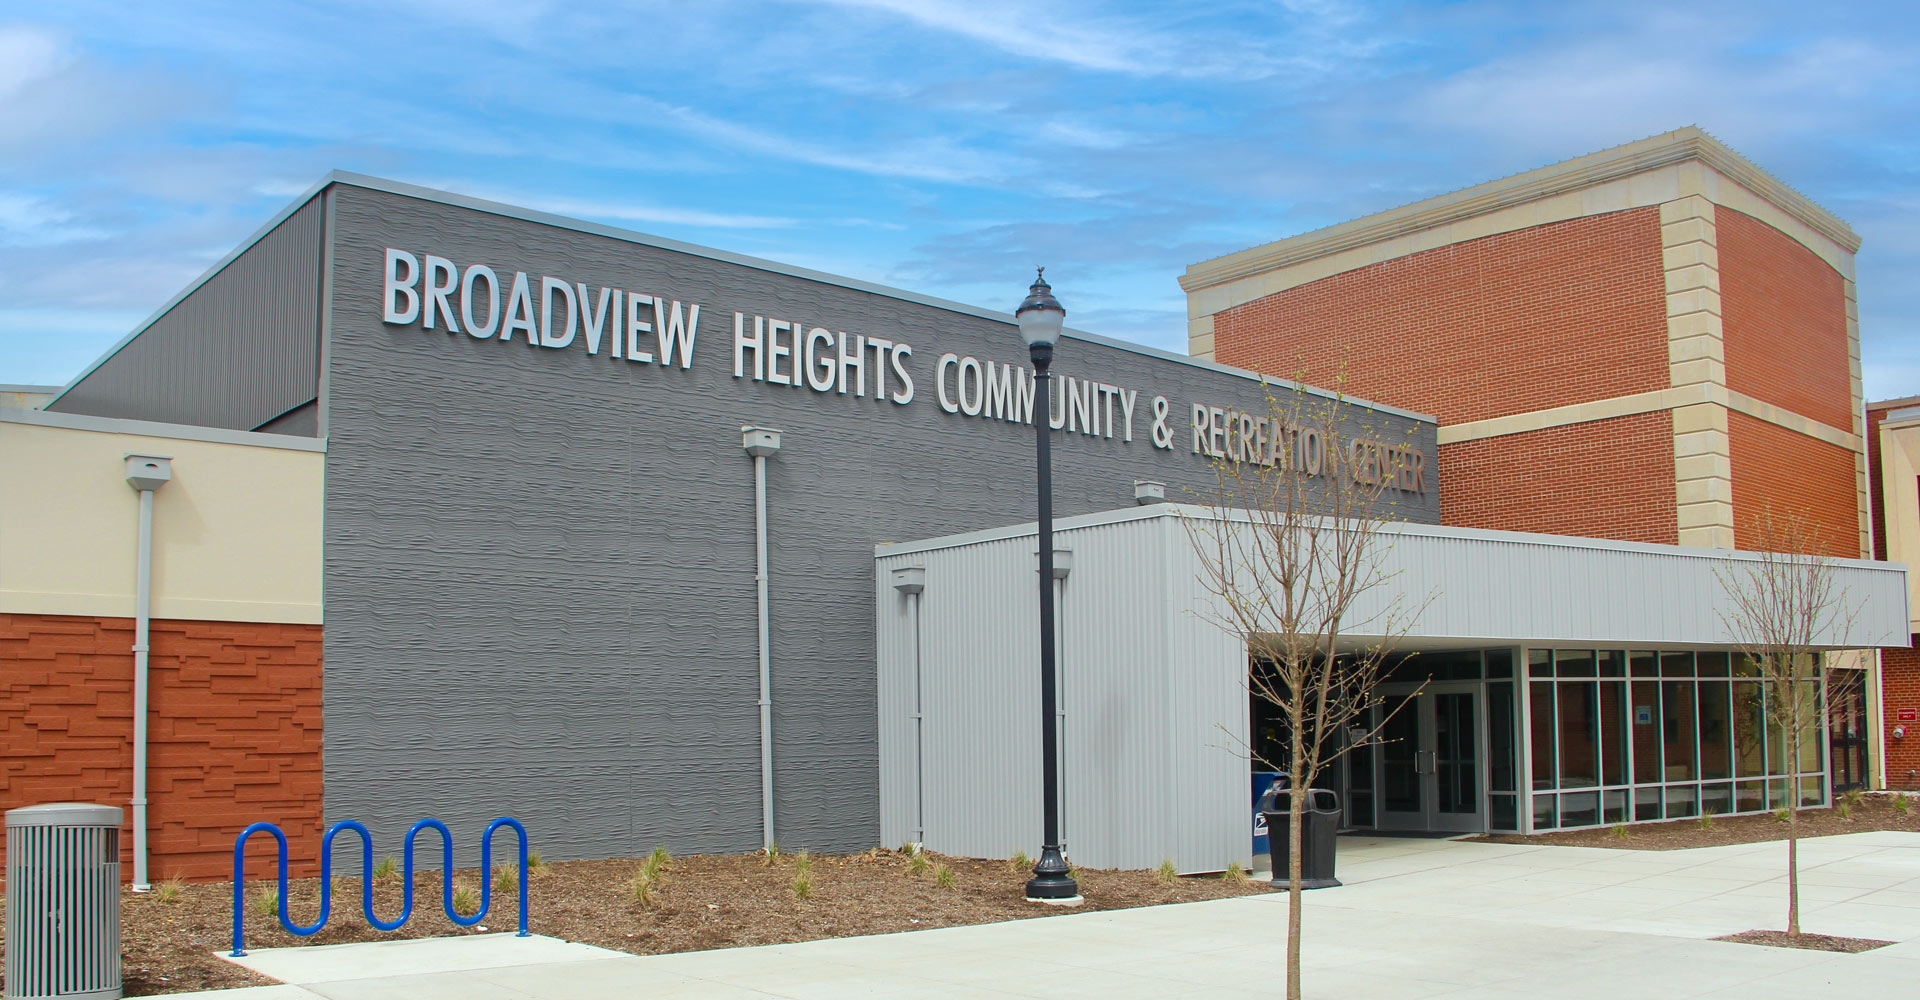 Broadview Heights Community & Recreation Center Sports